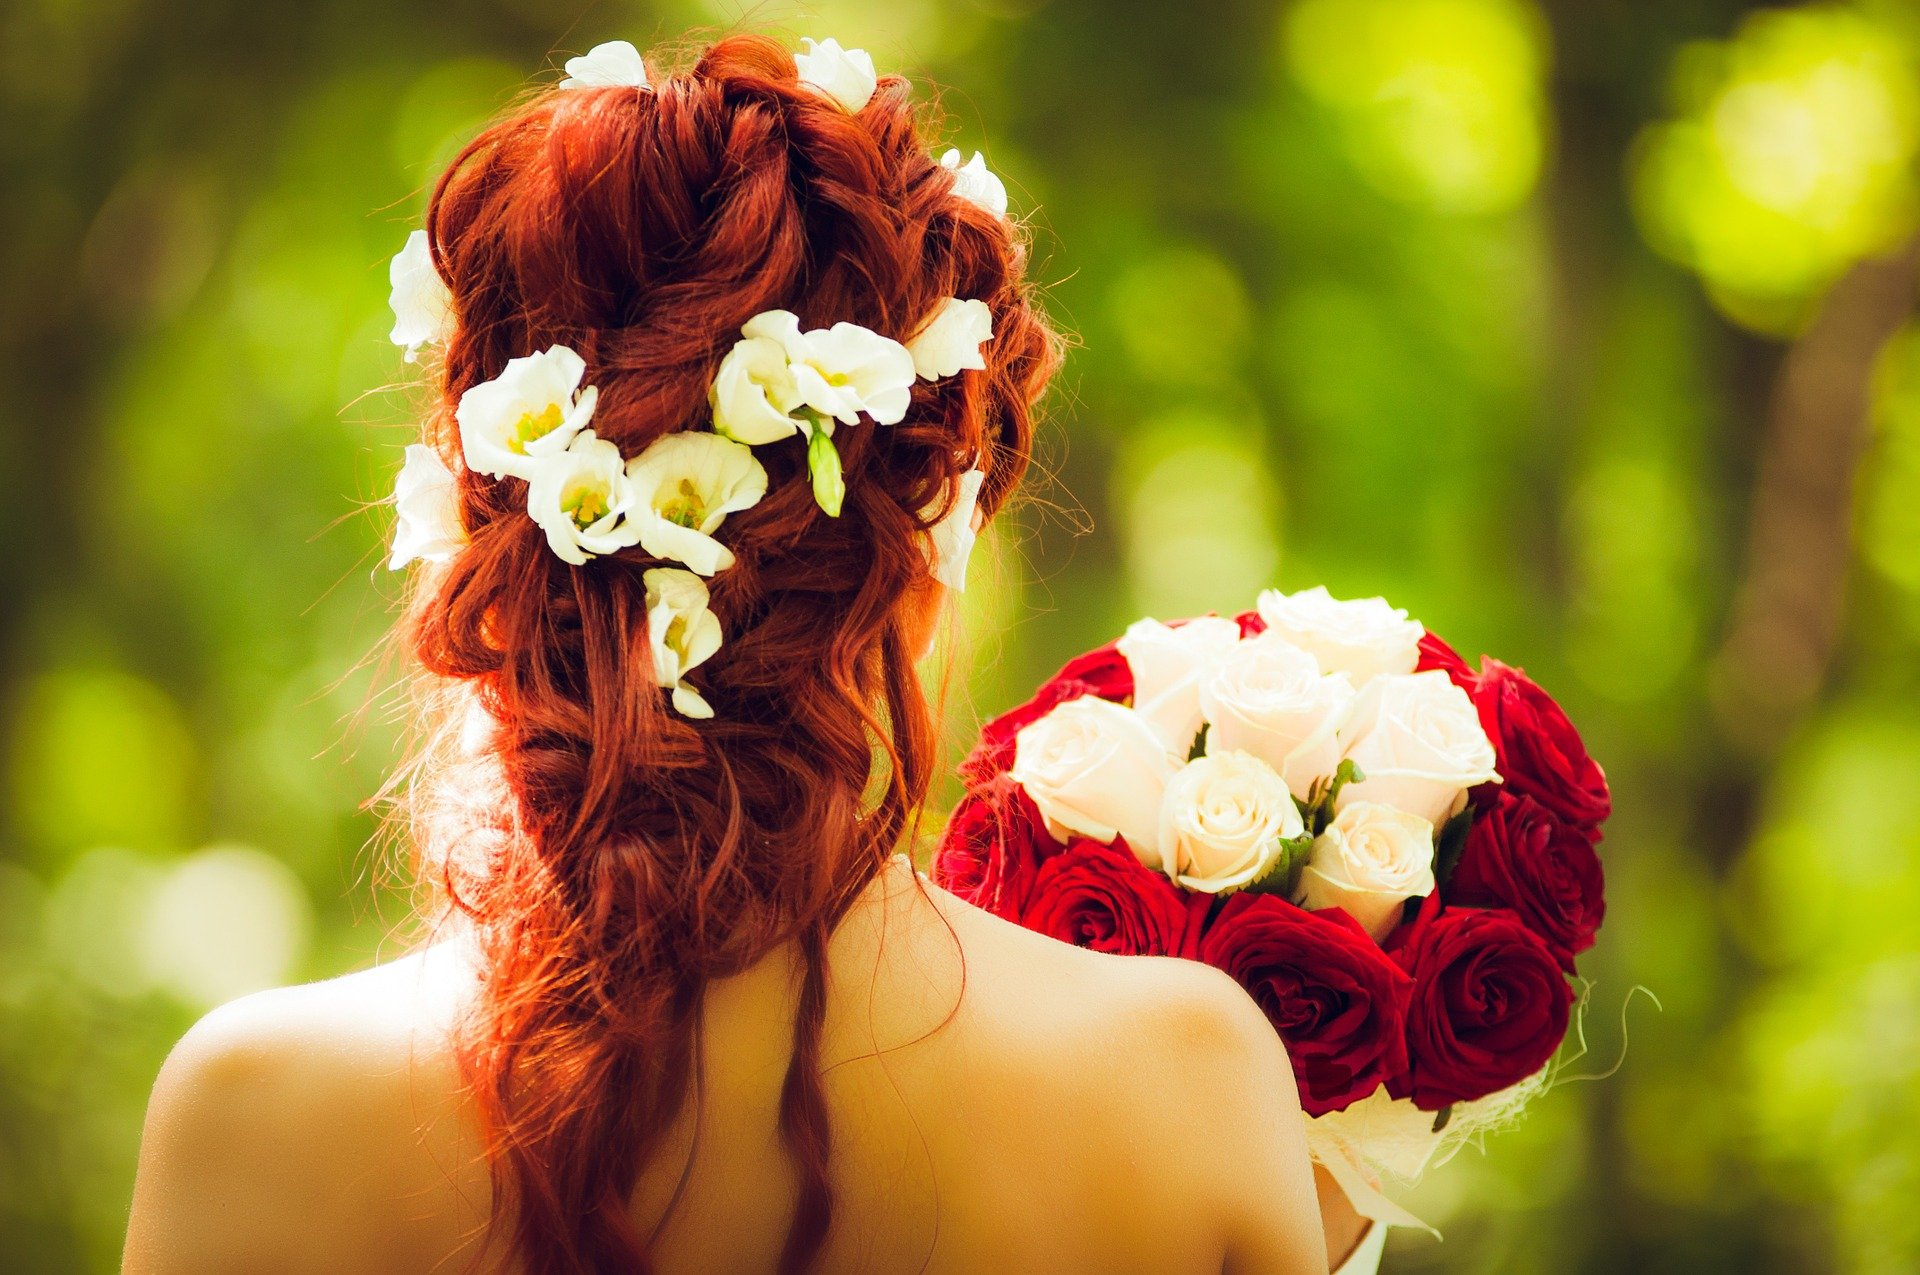 A woman on her wedding day holding a bouquet of flowers. | Source: Pixabay.